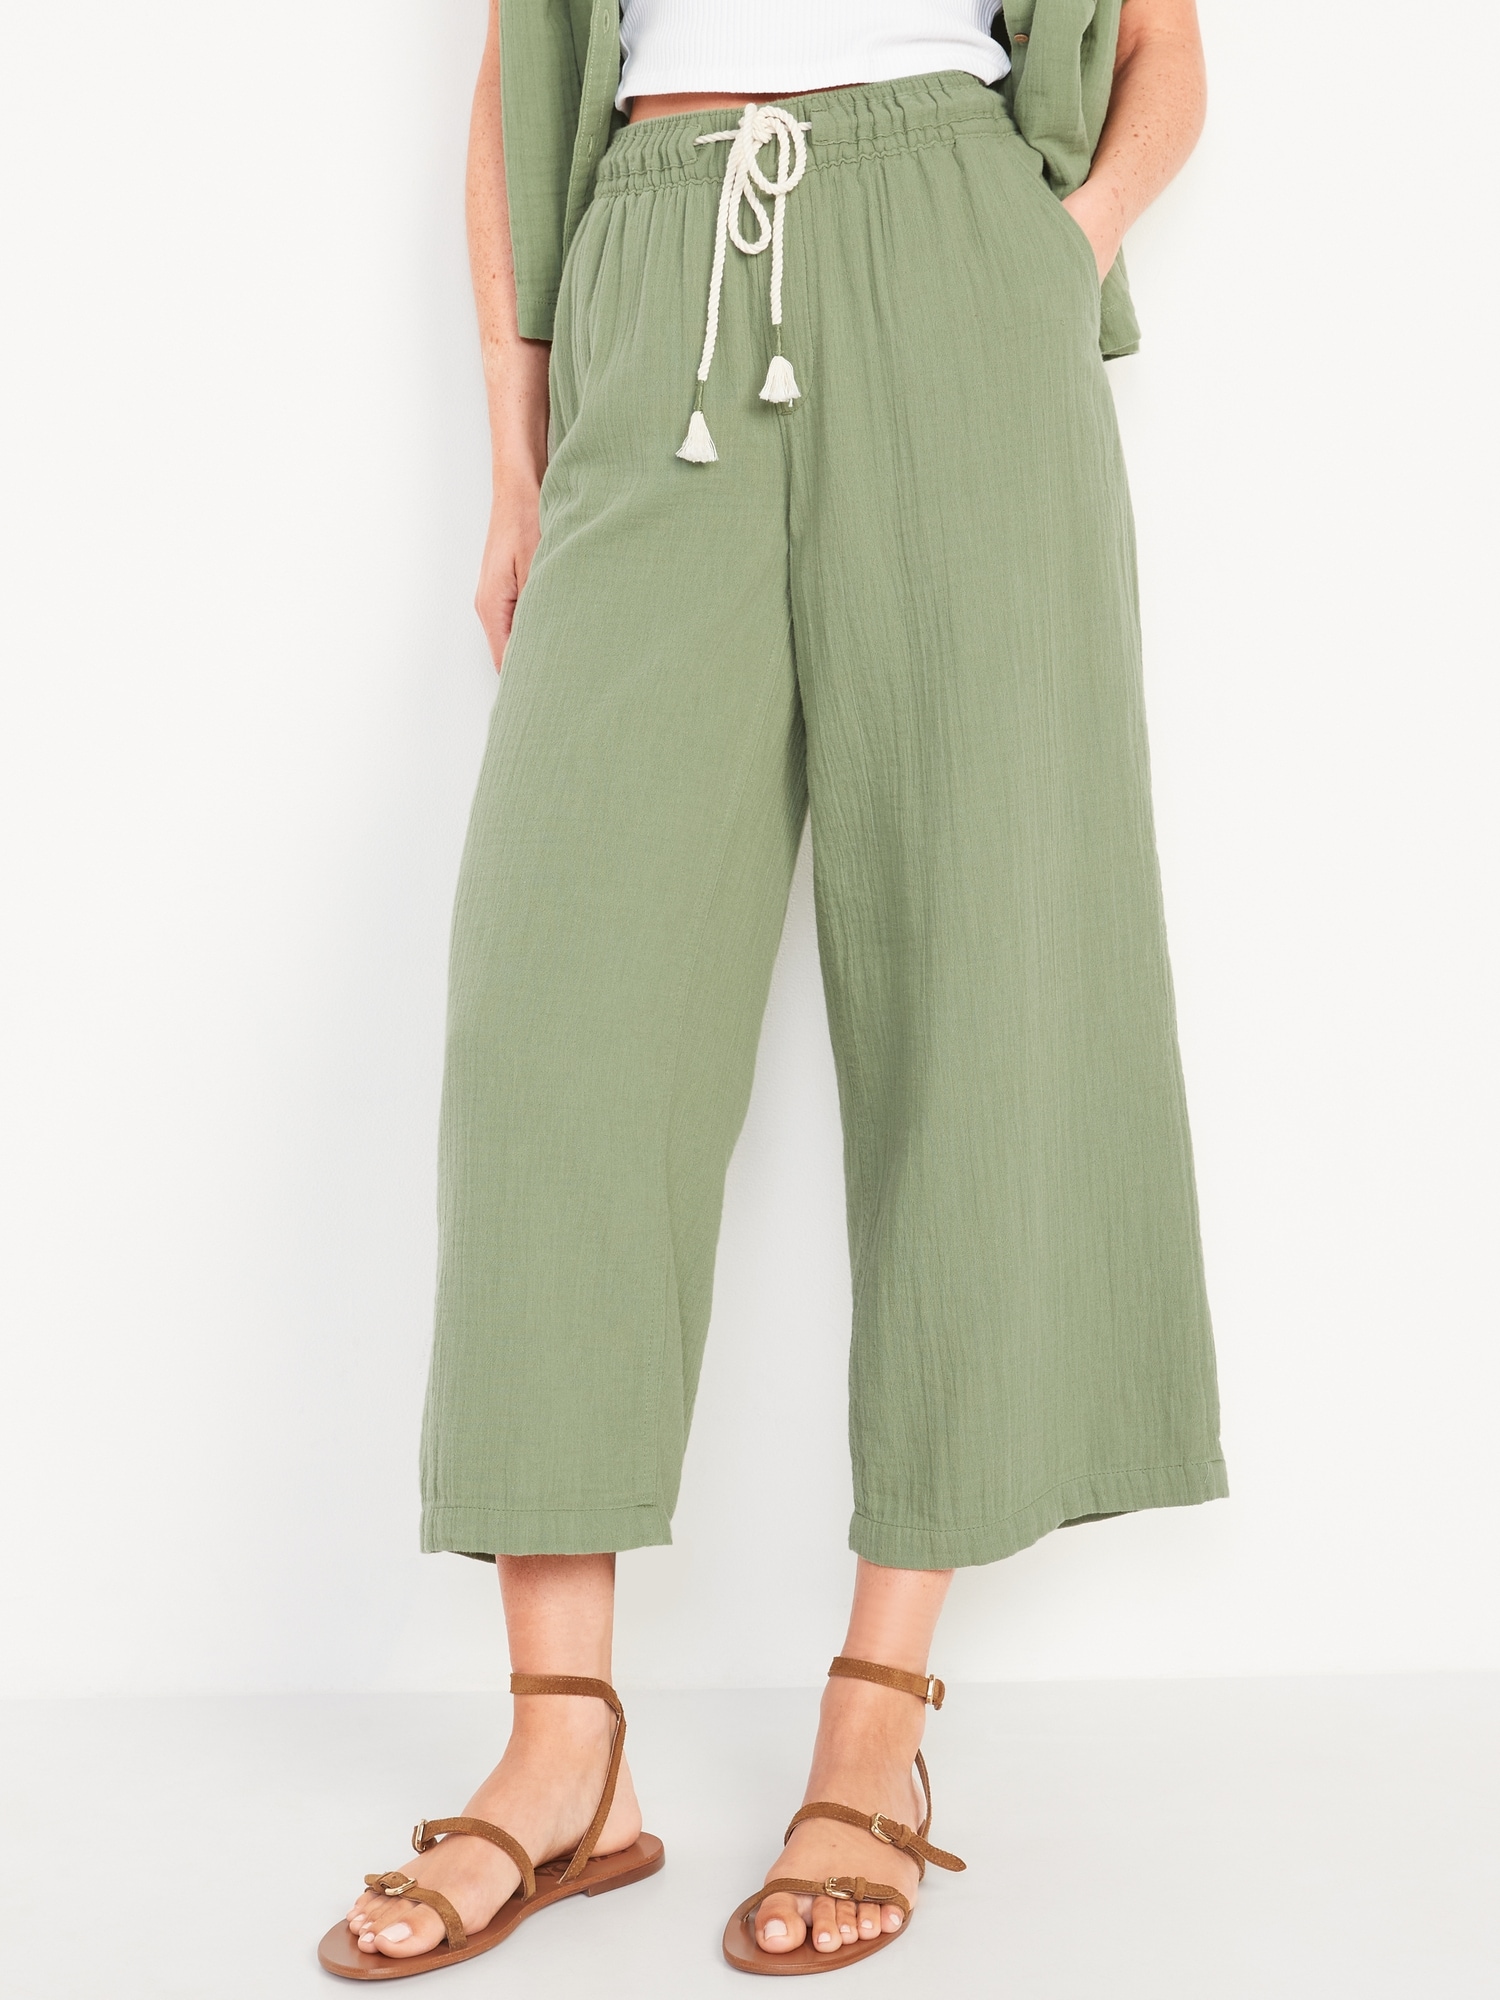 Mid-Rise Soft Pull-On Pants for Women | Old Navy